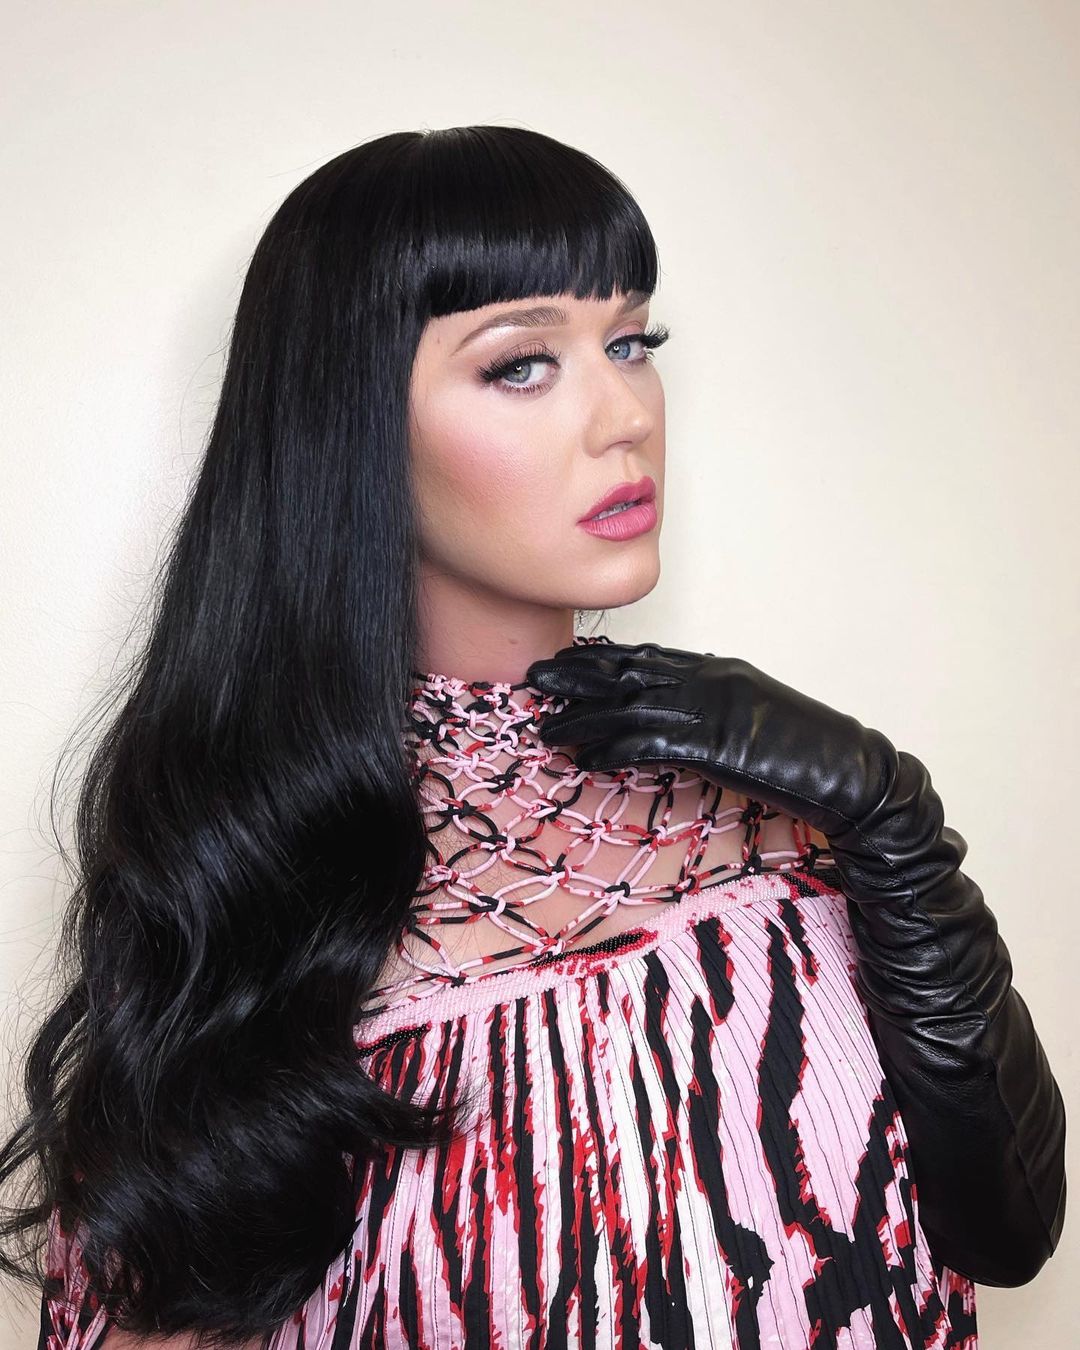 Katy Perry Goes Back To Her Classic Black Hair On 'American Idol'